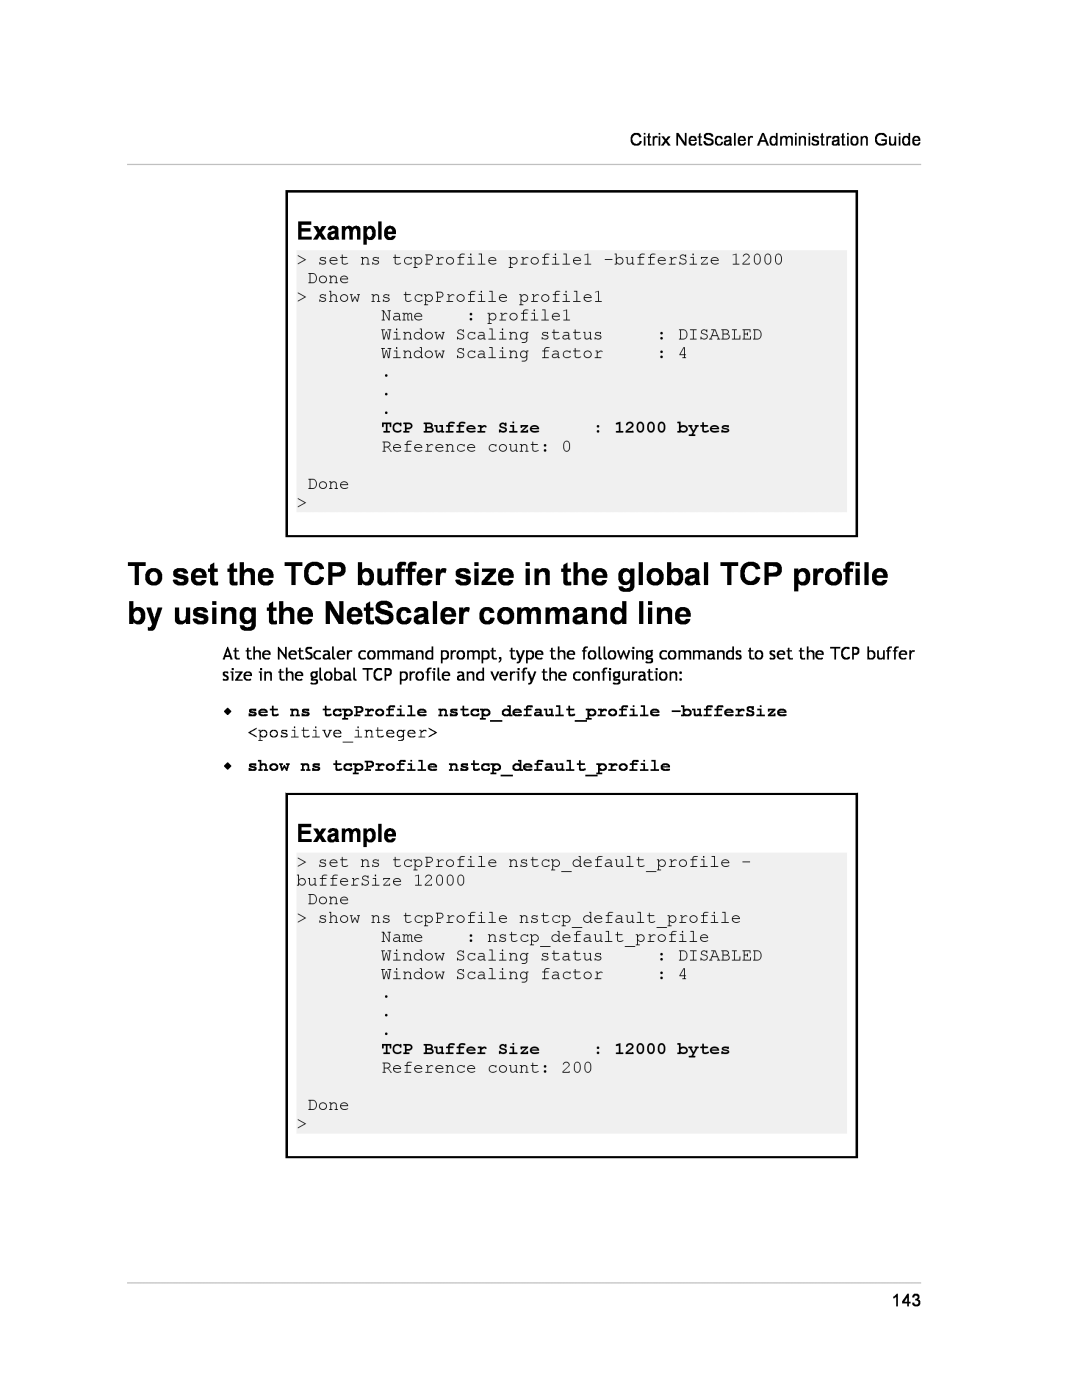 Citrix Systems CITRIX NETSCALER 9.3 manual Example, 12000, bytes, TCP Buffer Size, w show ns tcpProfile nstcpdefaultprofile 